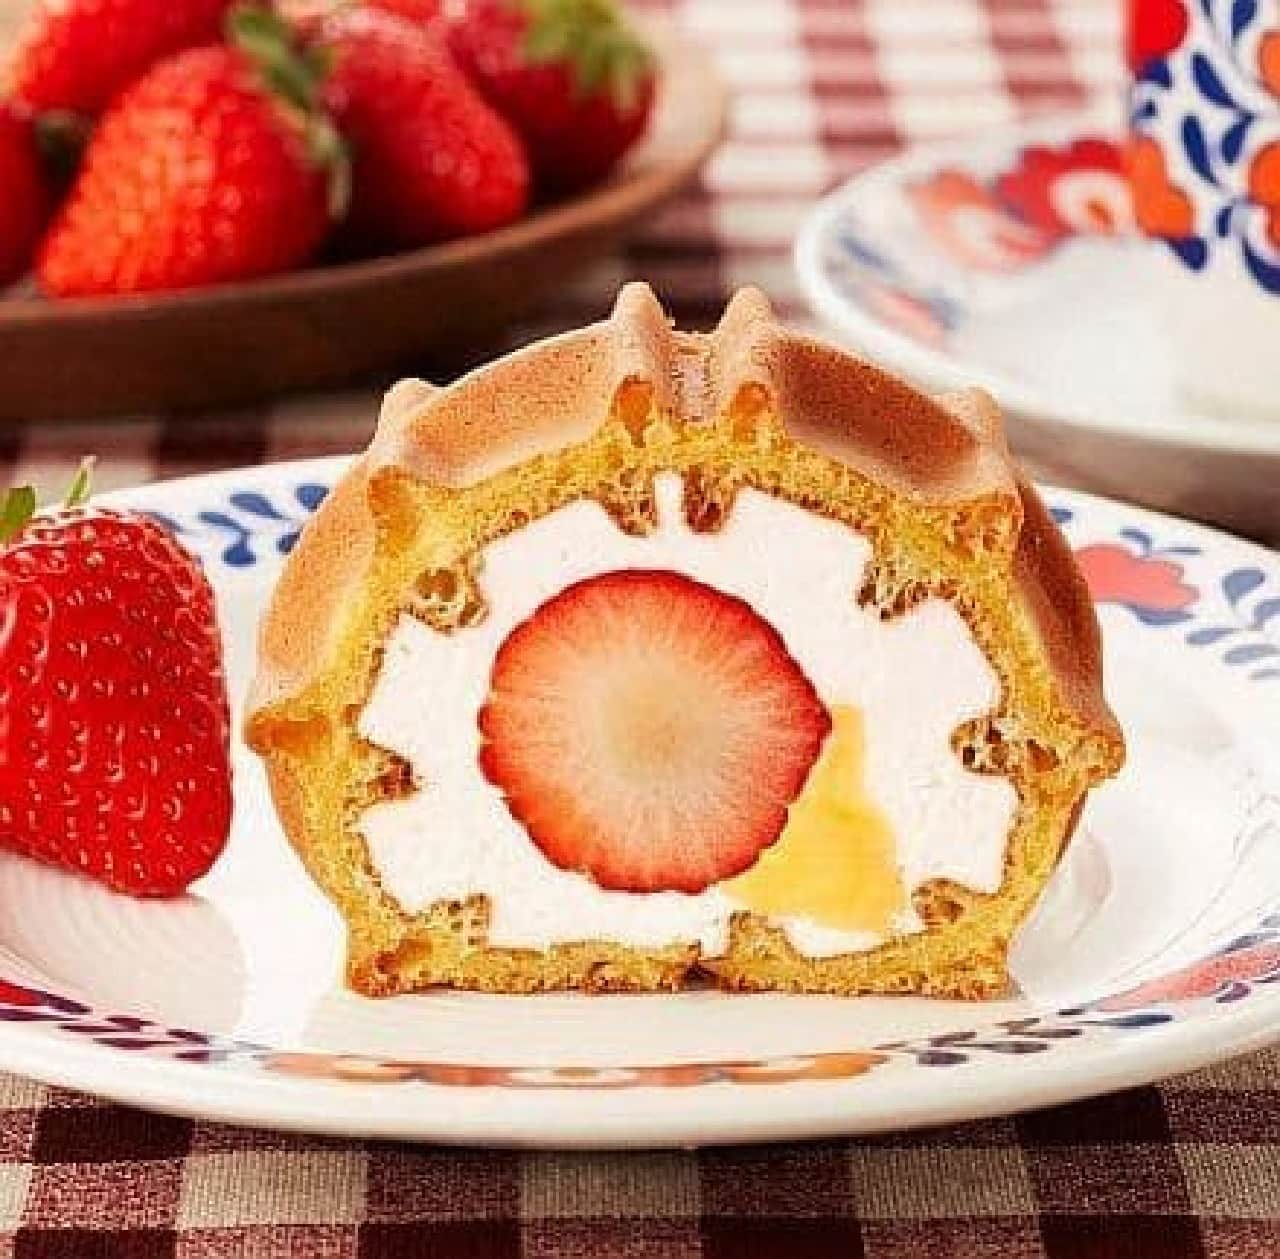 Yale L "Waffle Round and Round Strawberry Roll of the Season"